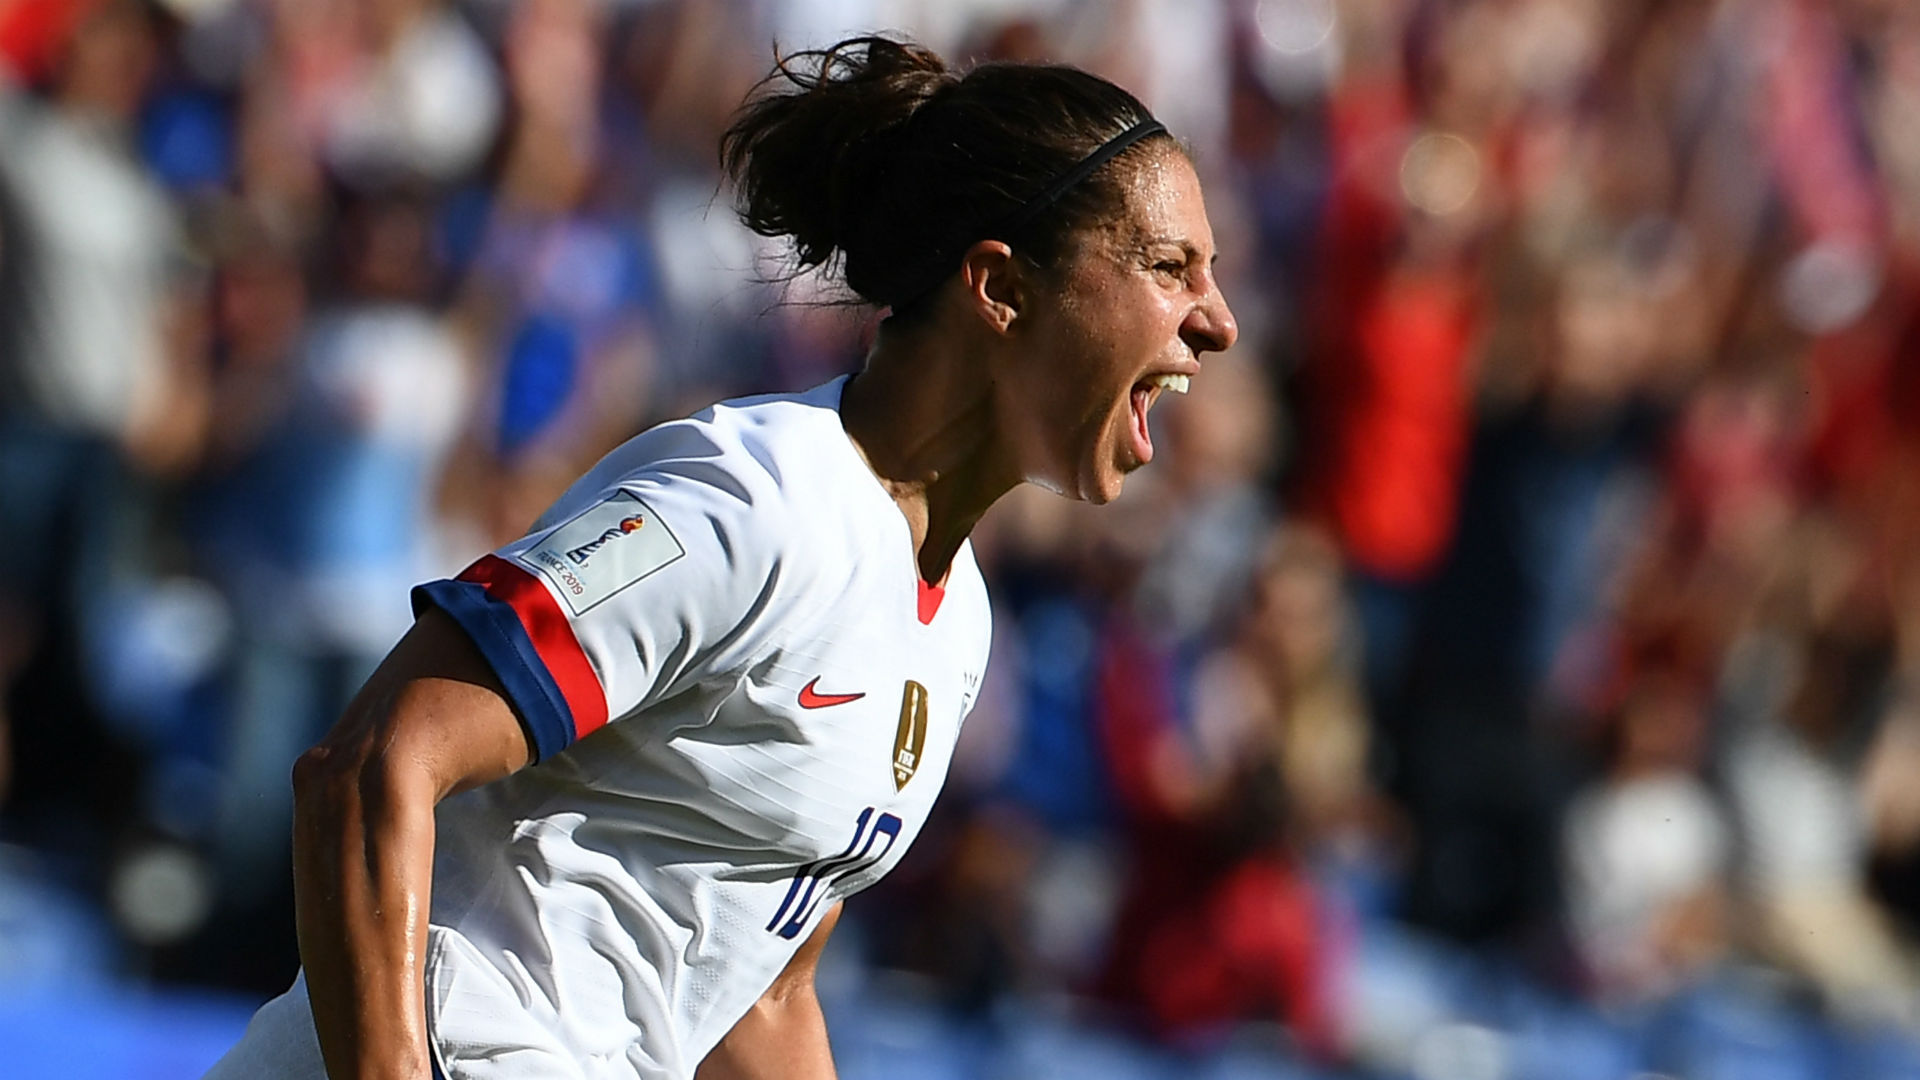 Hall of Fame kicker Morten Andersen offers to help Carli Lloyd with NFL career